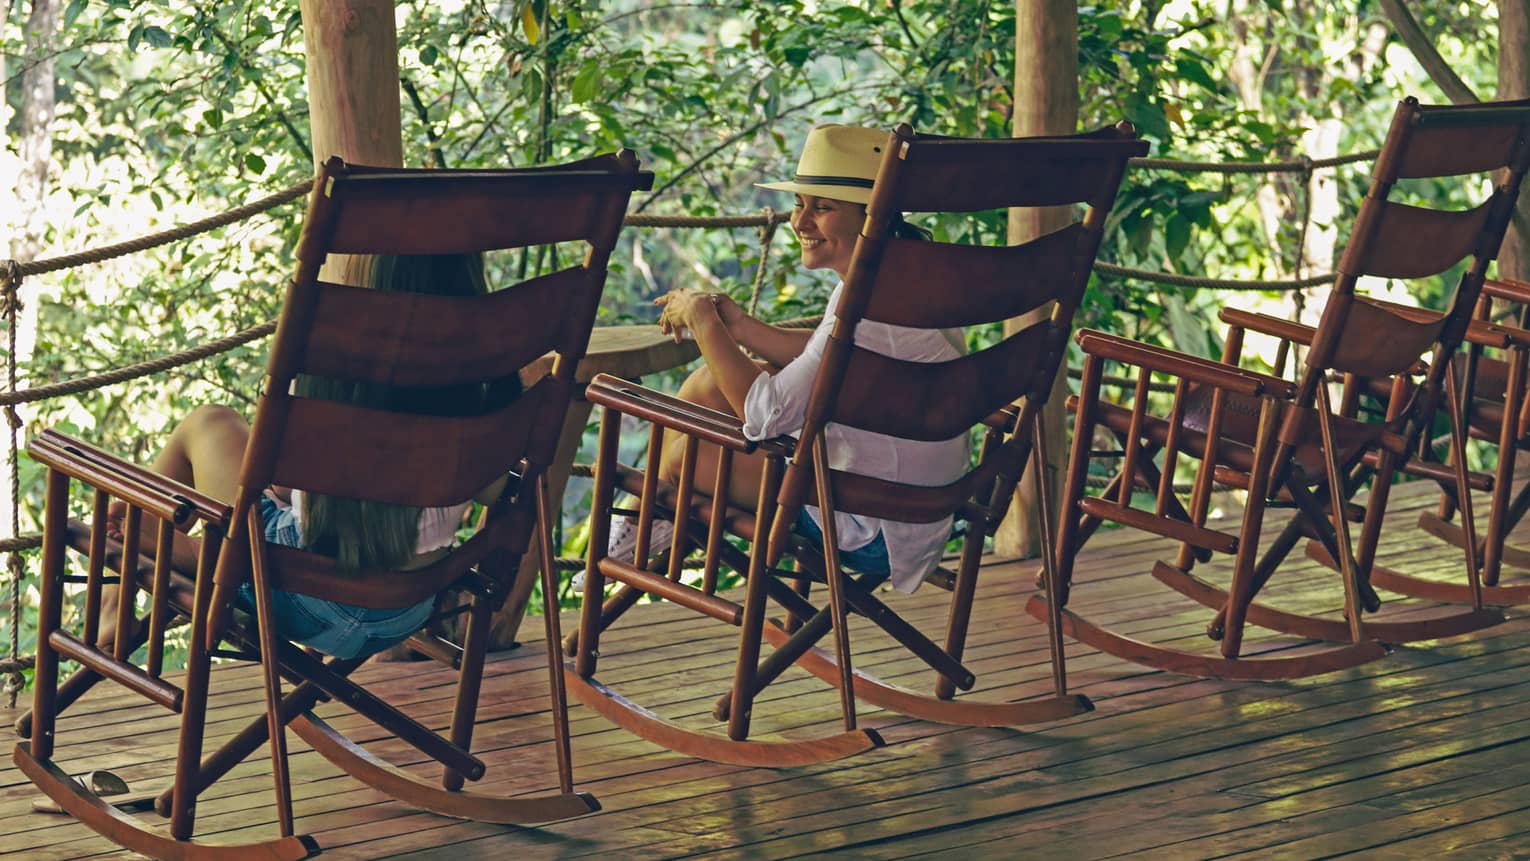 Two people sitting in large wooden rocking chairs set in a row on a wooden deck overlooking the jungle